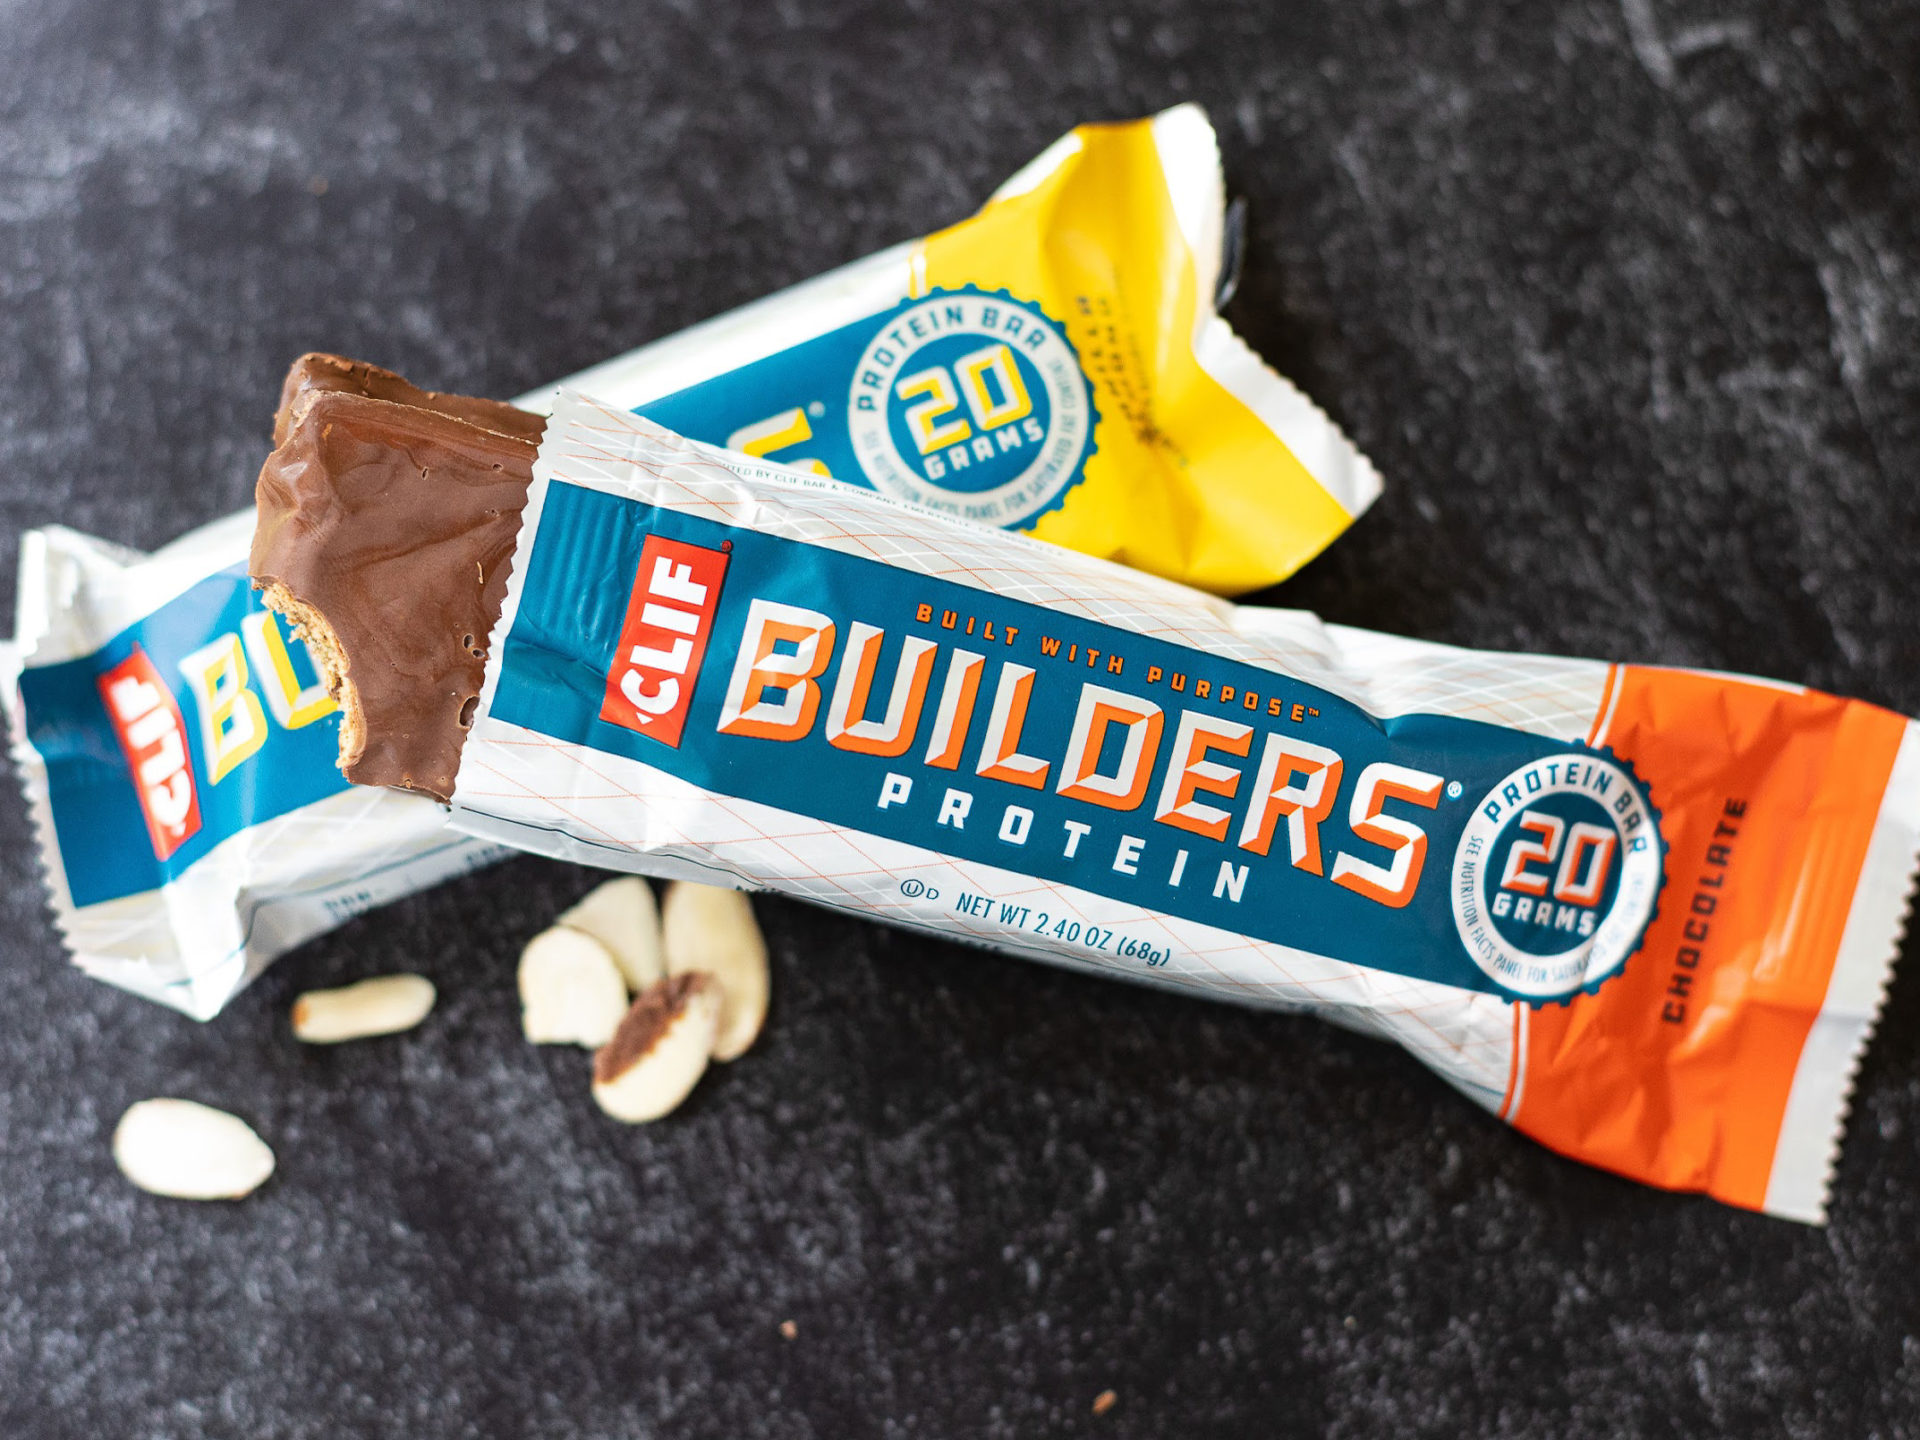 Clif Builders Protein Bar As Low As 79¢ At Kroger